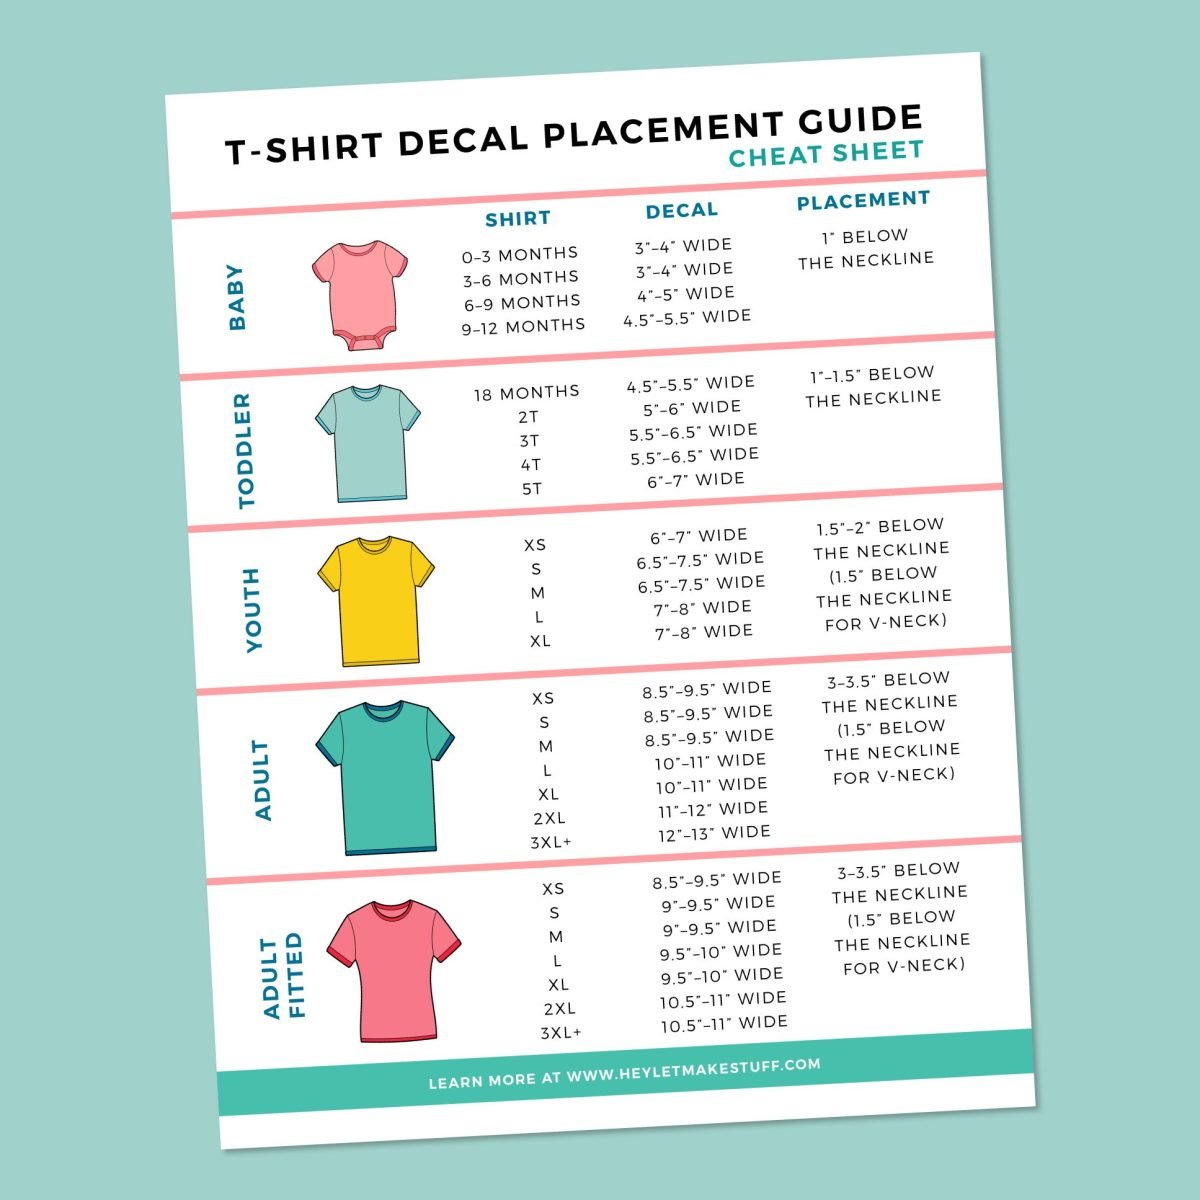 T-shirt decal placement guide